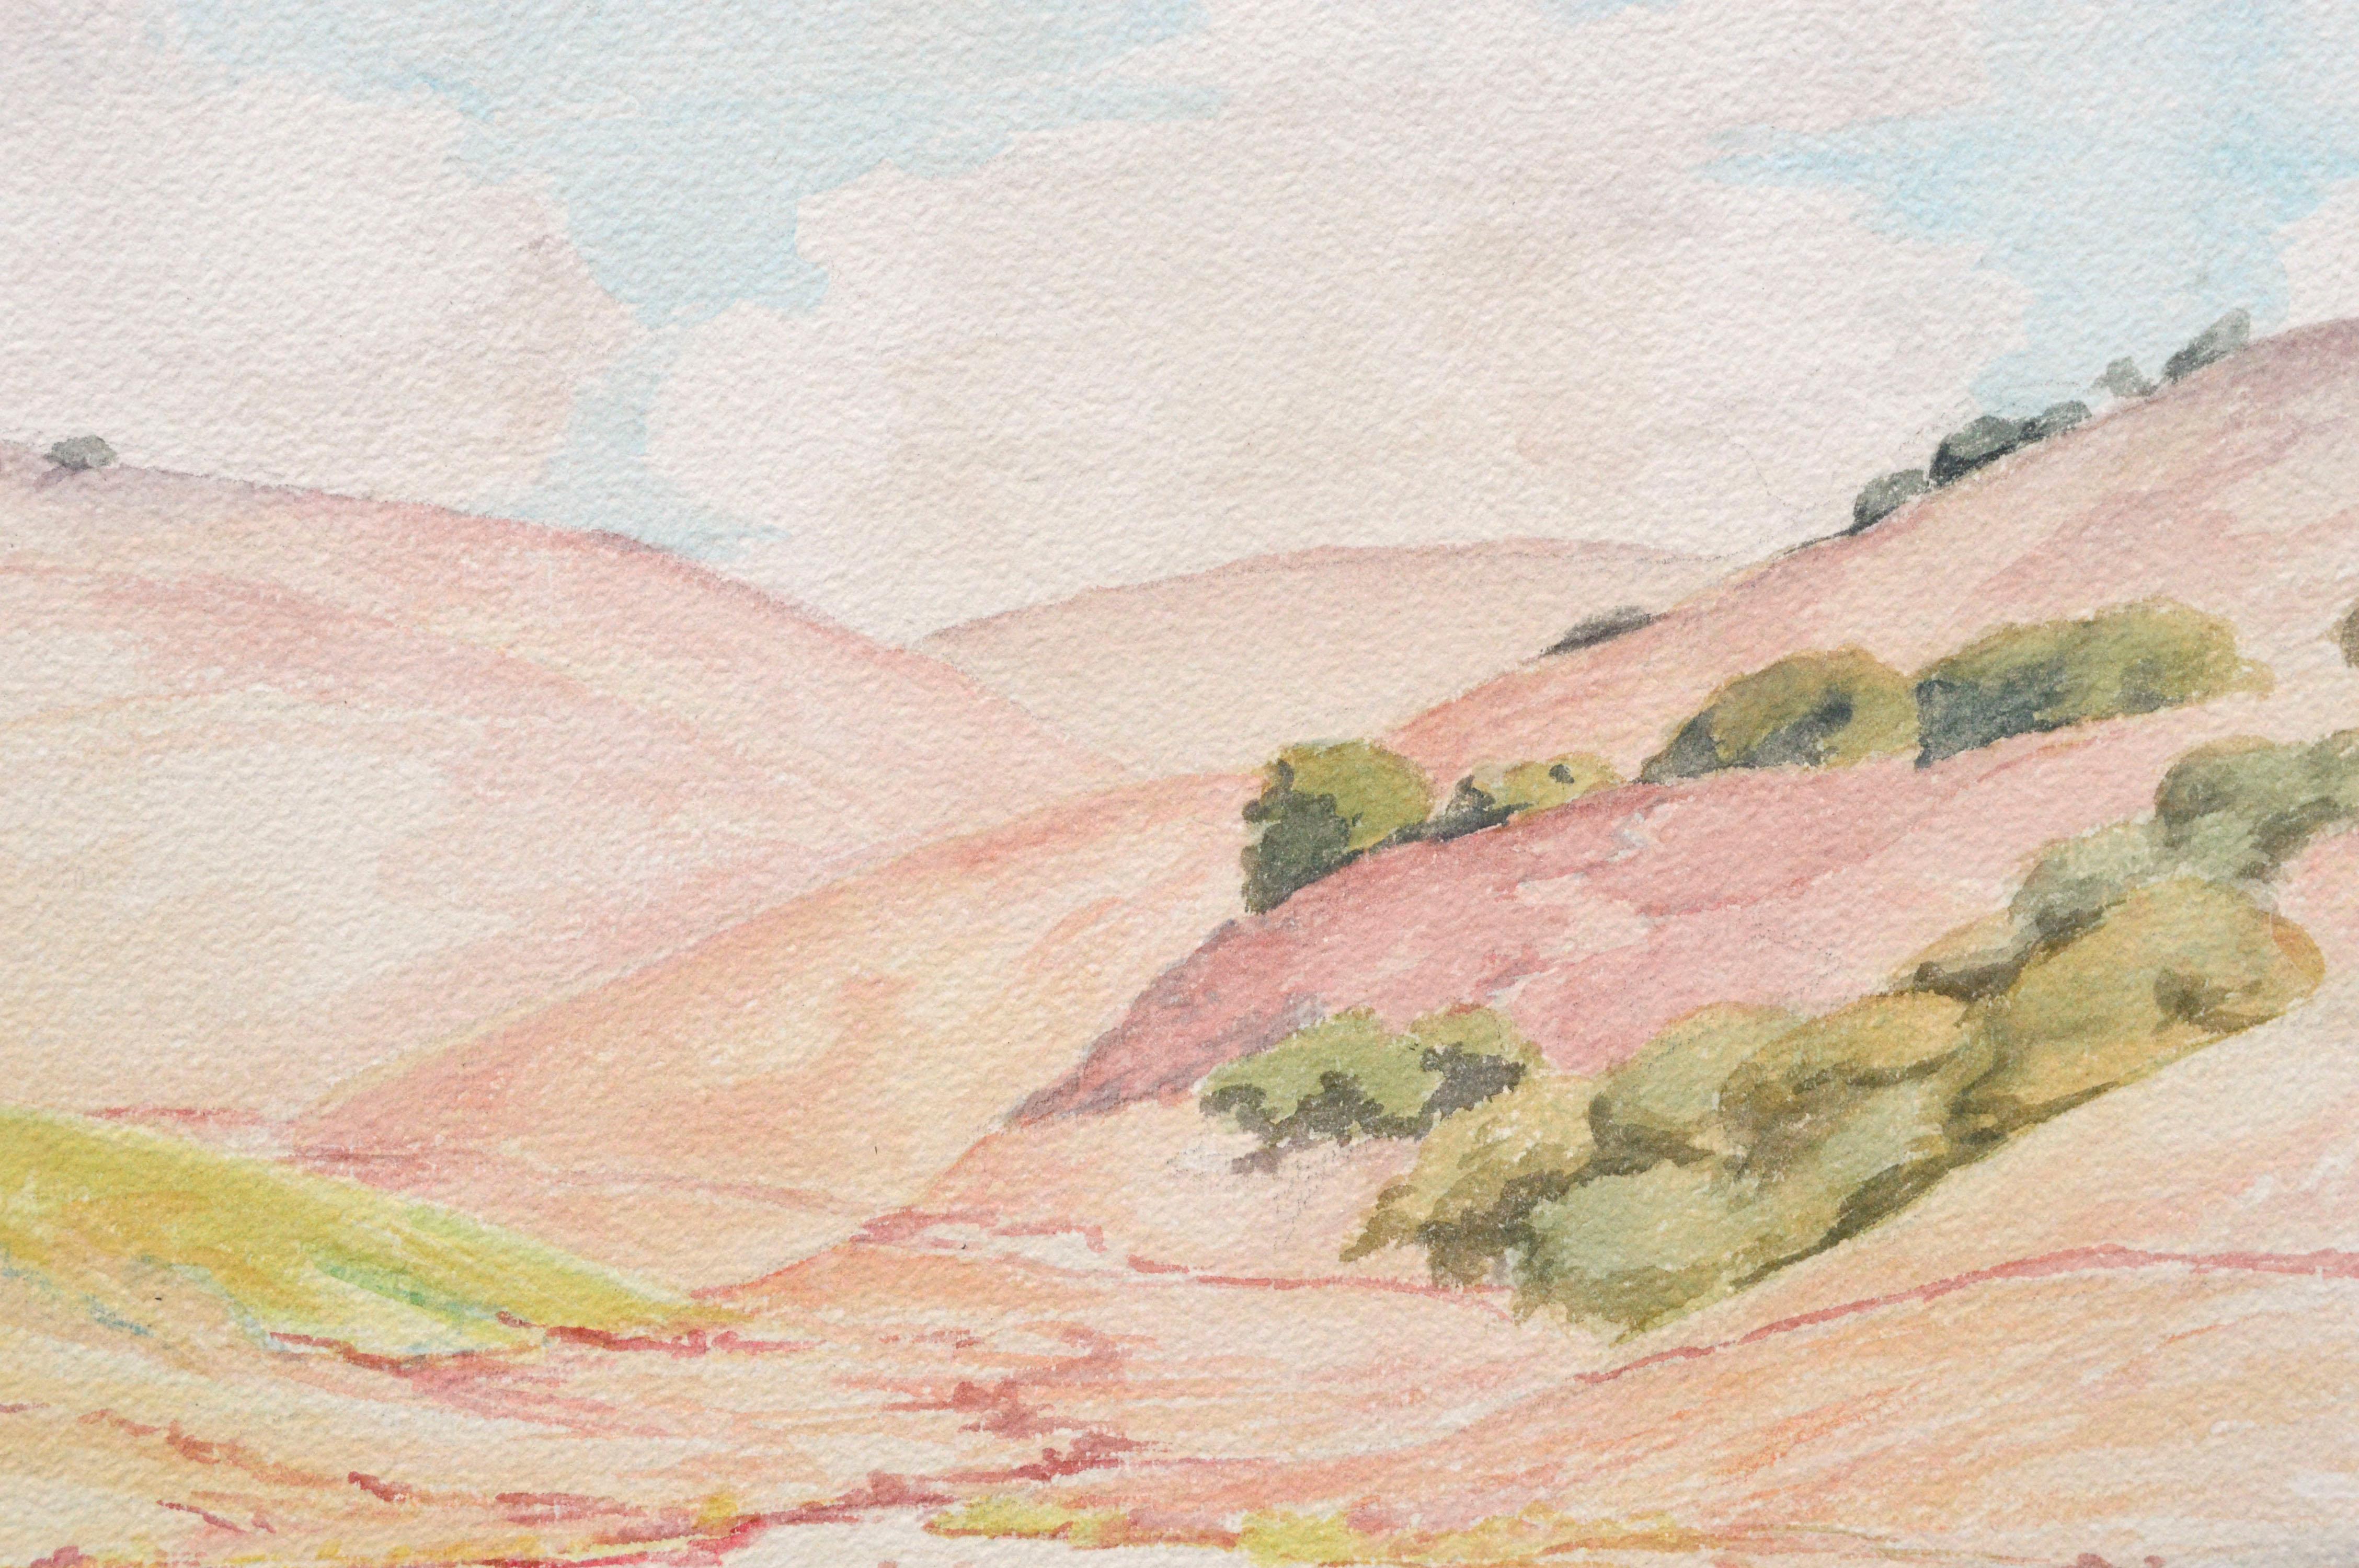 Vibrant California landscape consisting of pink and gold rolling hills, oak trees, and a body of water in the foreground. Signed twice, by the artist in the lower right corner, once in paint, and a second time in pencil. Presented in a cream mat.